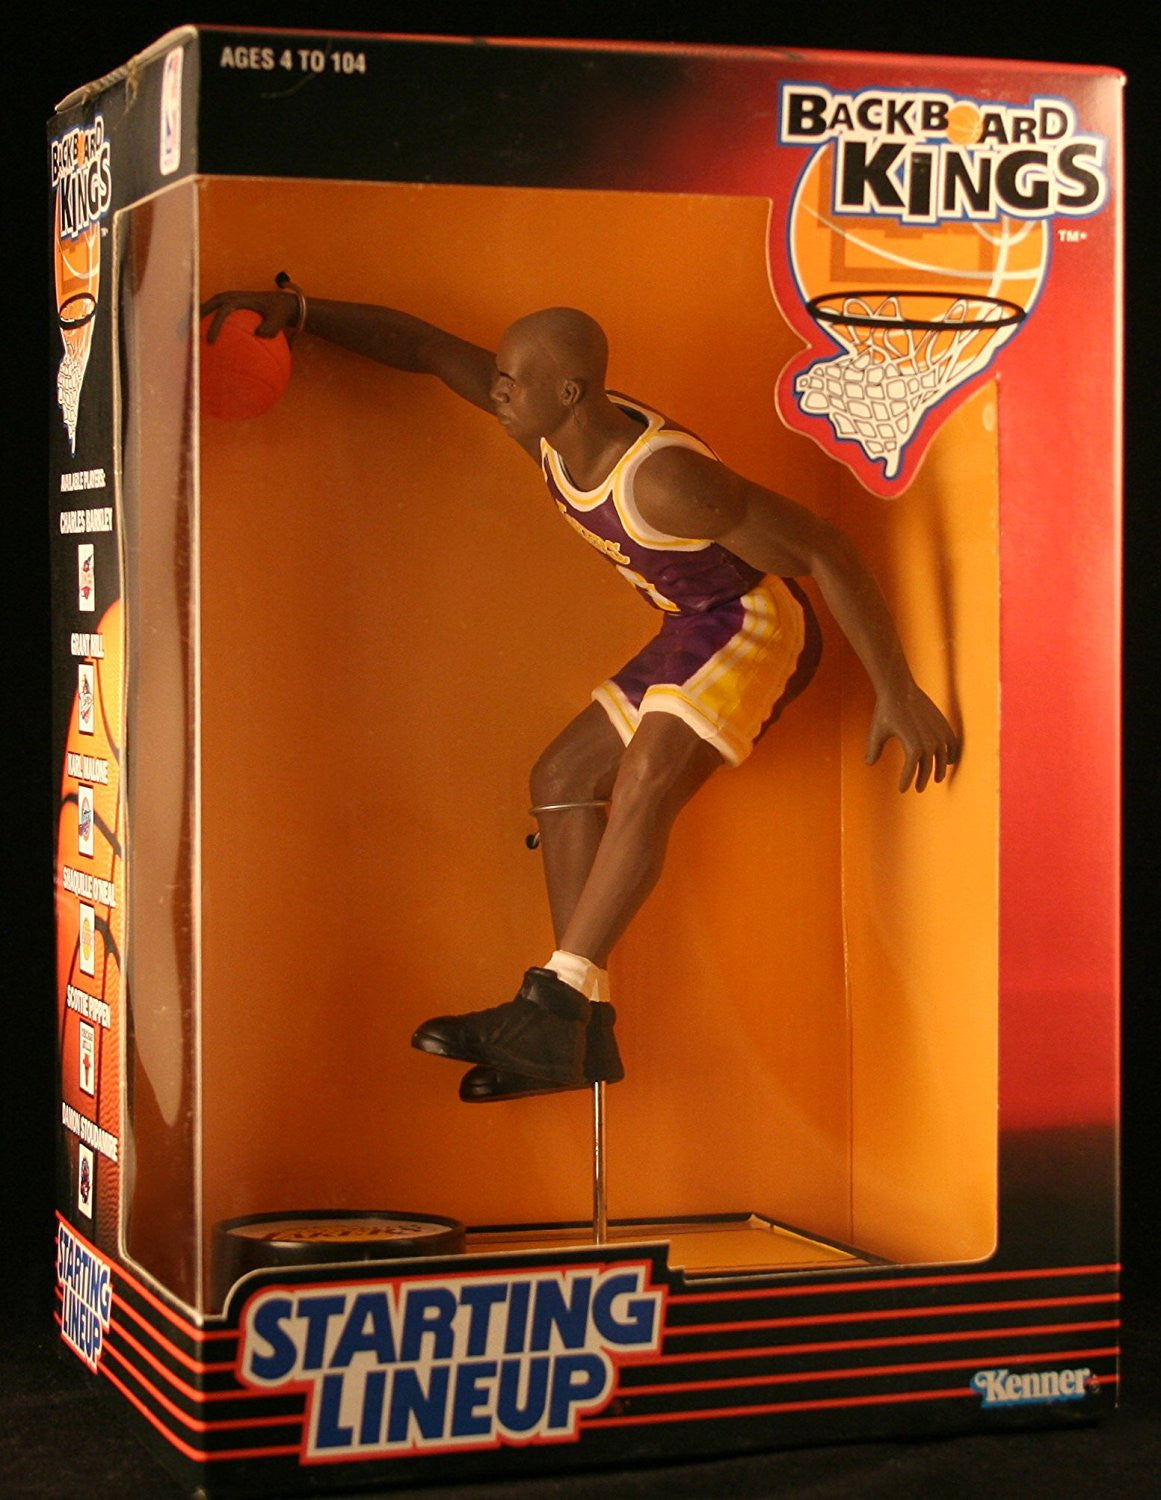 SHAQUILLE O'NEAL / LOS ANGELES LAKERS 1997 NBA Backboard Kings Starting Lineup Deluxe 6 Inch Figure